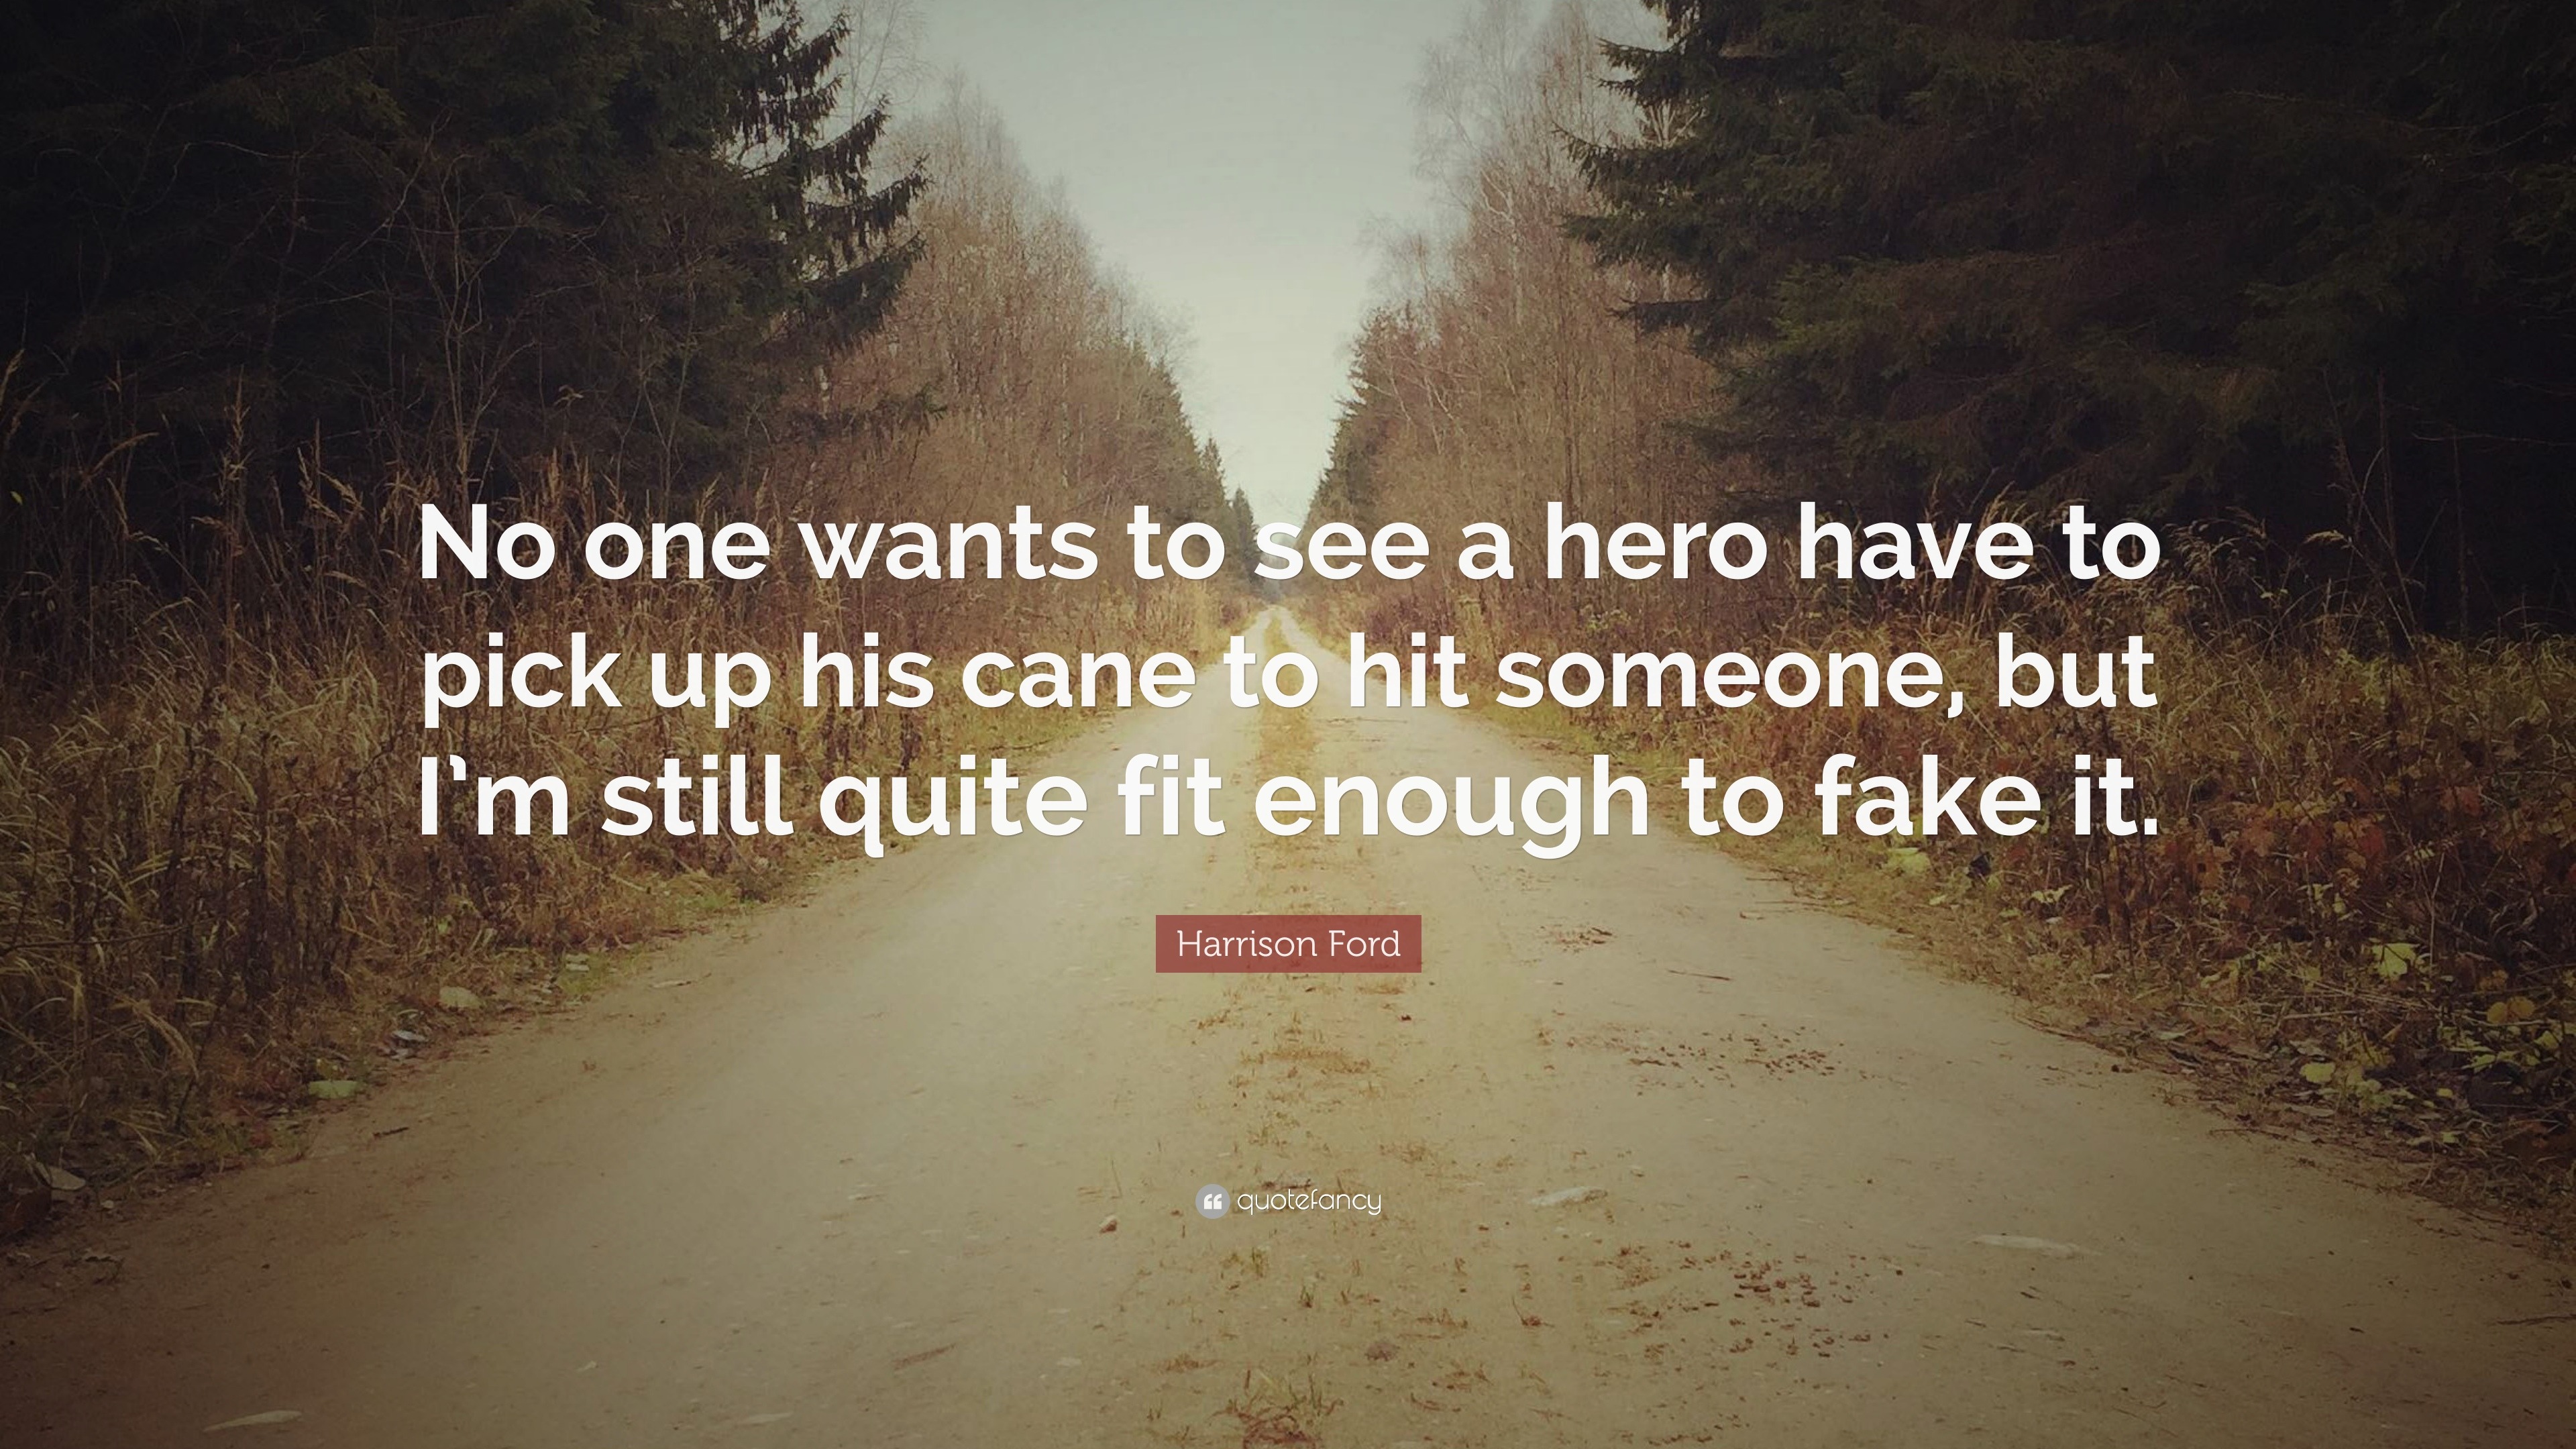 Harrison Ford Quote: “No one wants to see a hero have to pick up his ...